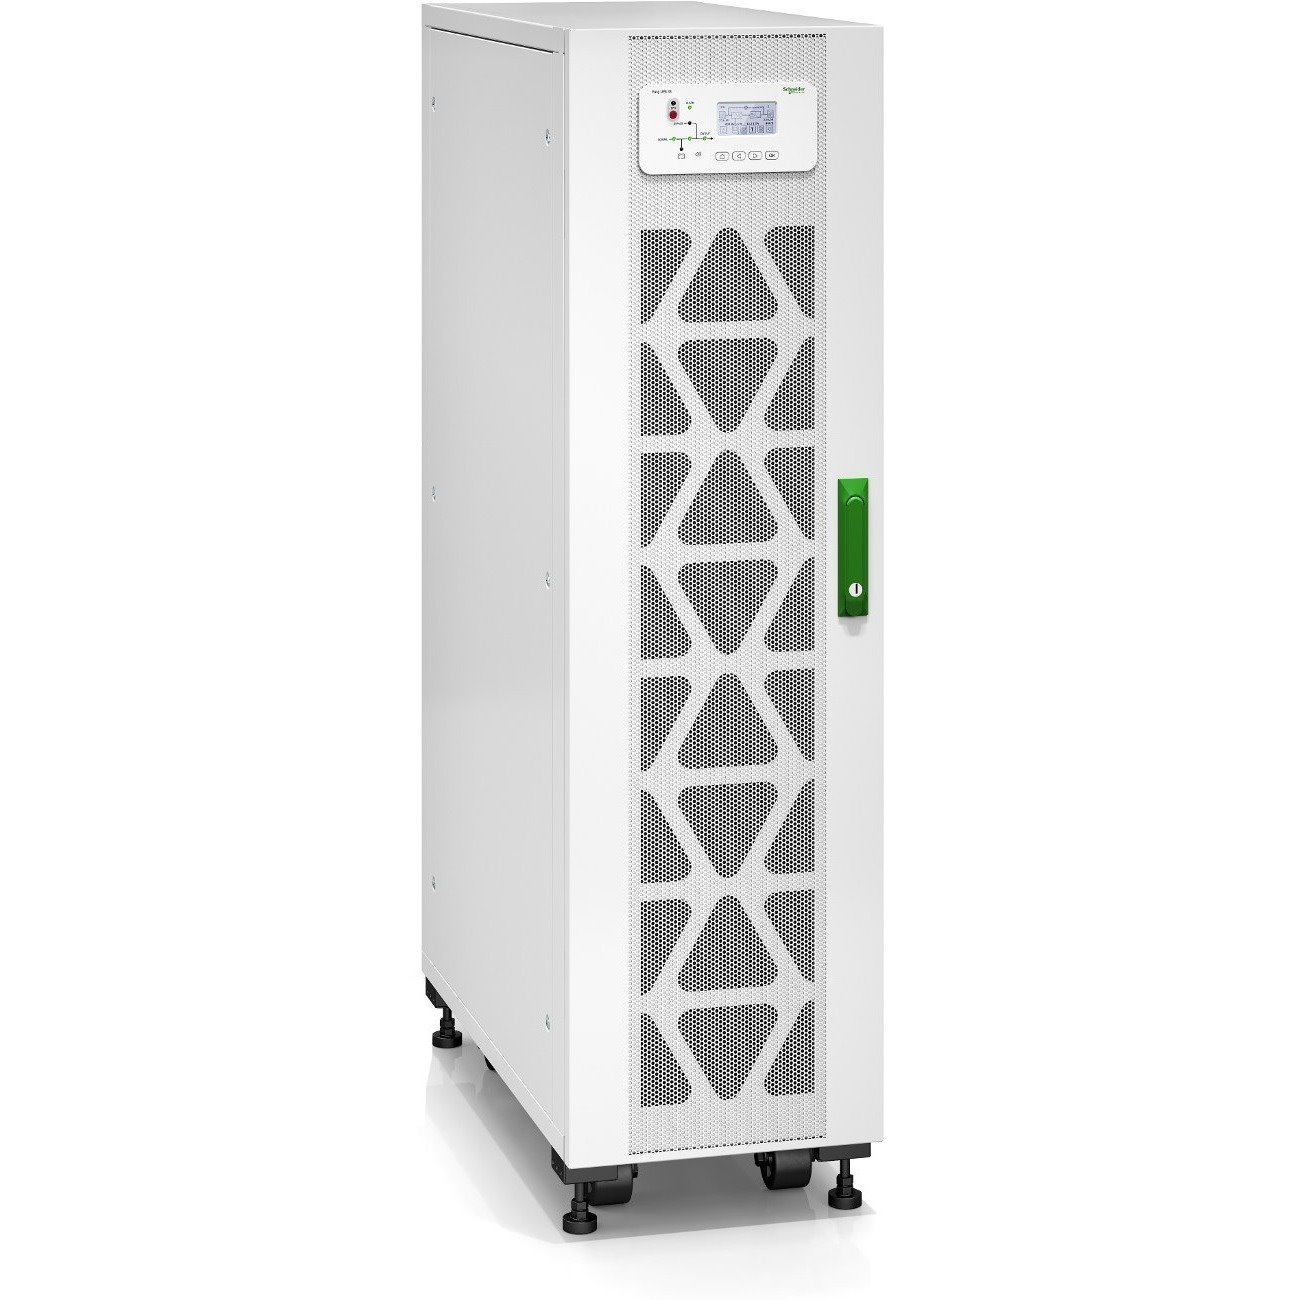 APC by Schneider Electric Easy UPS 3S Double Conversion Online UPS - 20 kVA - Three Phase